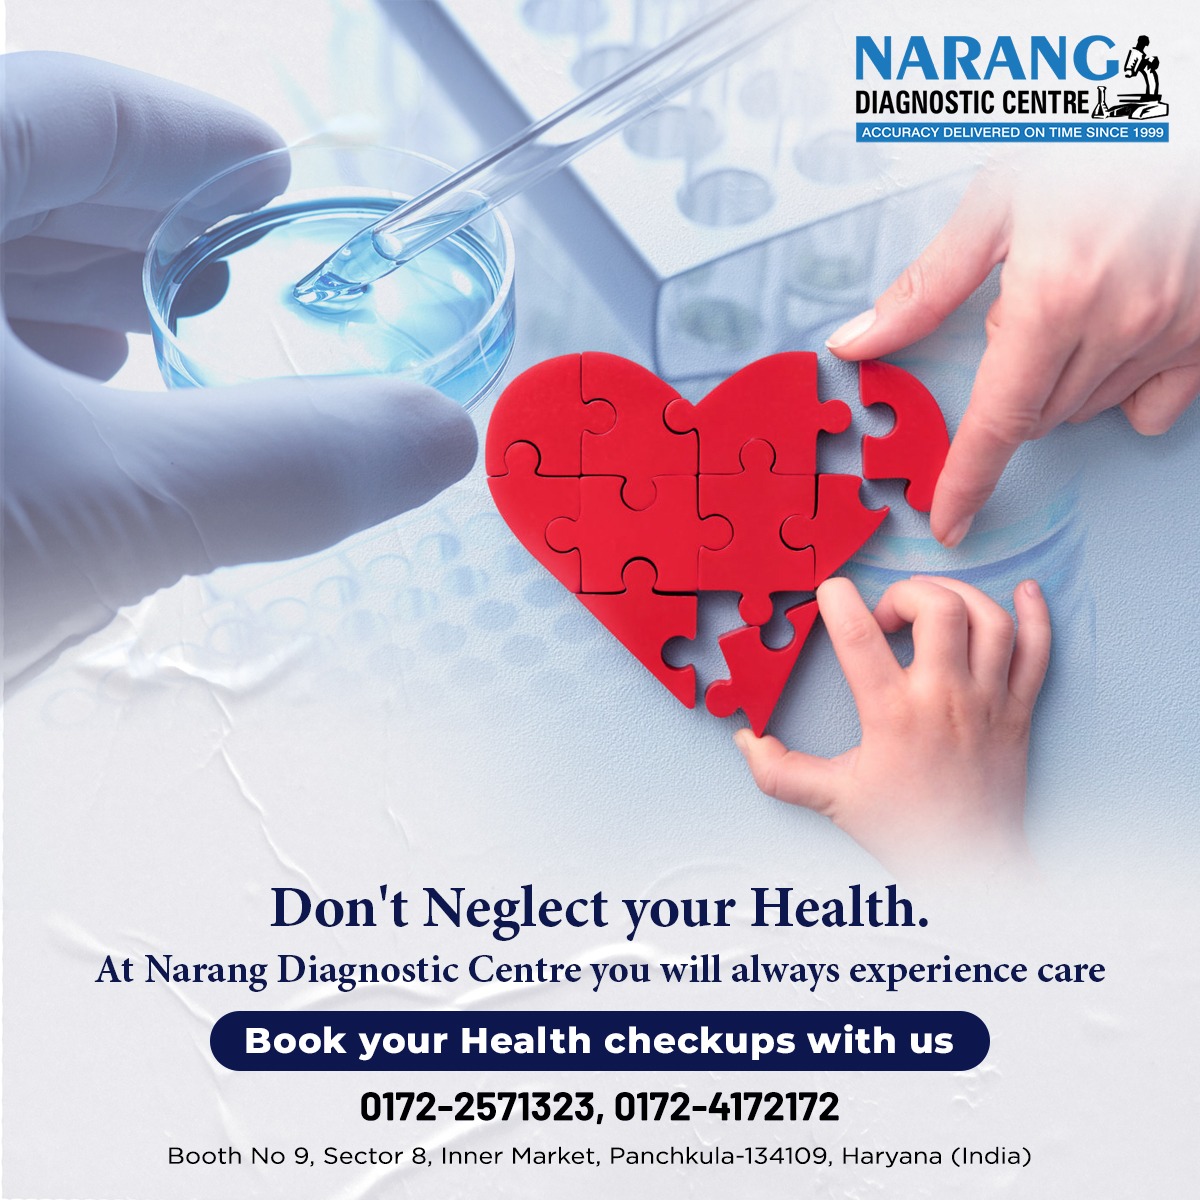 Don't Neglect your 𝐇𝐞𝐚𝐥𝐭𝐡. At 𝗡𝗮𝗿𝗮𝗻𝗴 𝗗𝗶𝗮𝗴𝗻𝗼𝘀𝘁𝗶𝗰 𝗖𝗲𝗻𝘁𝗿𝗲, you will always experience care

Book your 𝐇𝐞𝐚𝐥𝐭𝐡 𝐂𝐡𝐞𝐜𝐤-𝐮𝐩 - 0172-2571323 or 0172-4172172

#Healthcheckup #Healthpackage #Diagnosticcentre #Trusteddiagnosticcentre #Wholebodycheckup